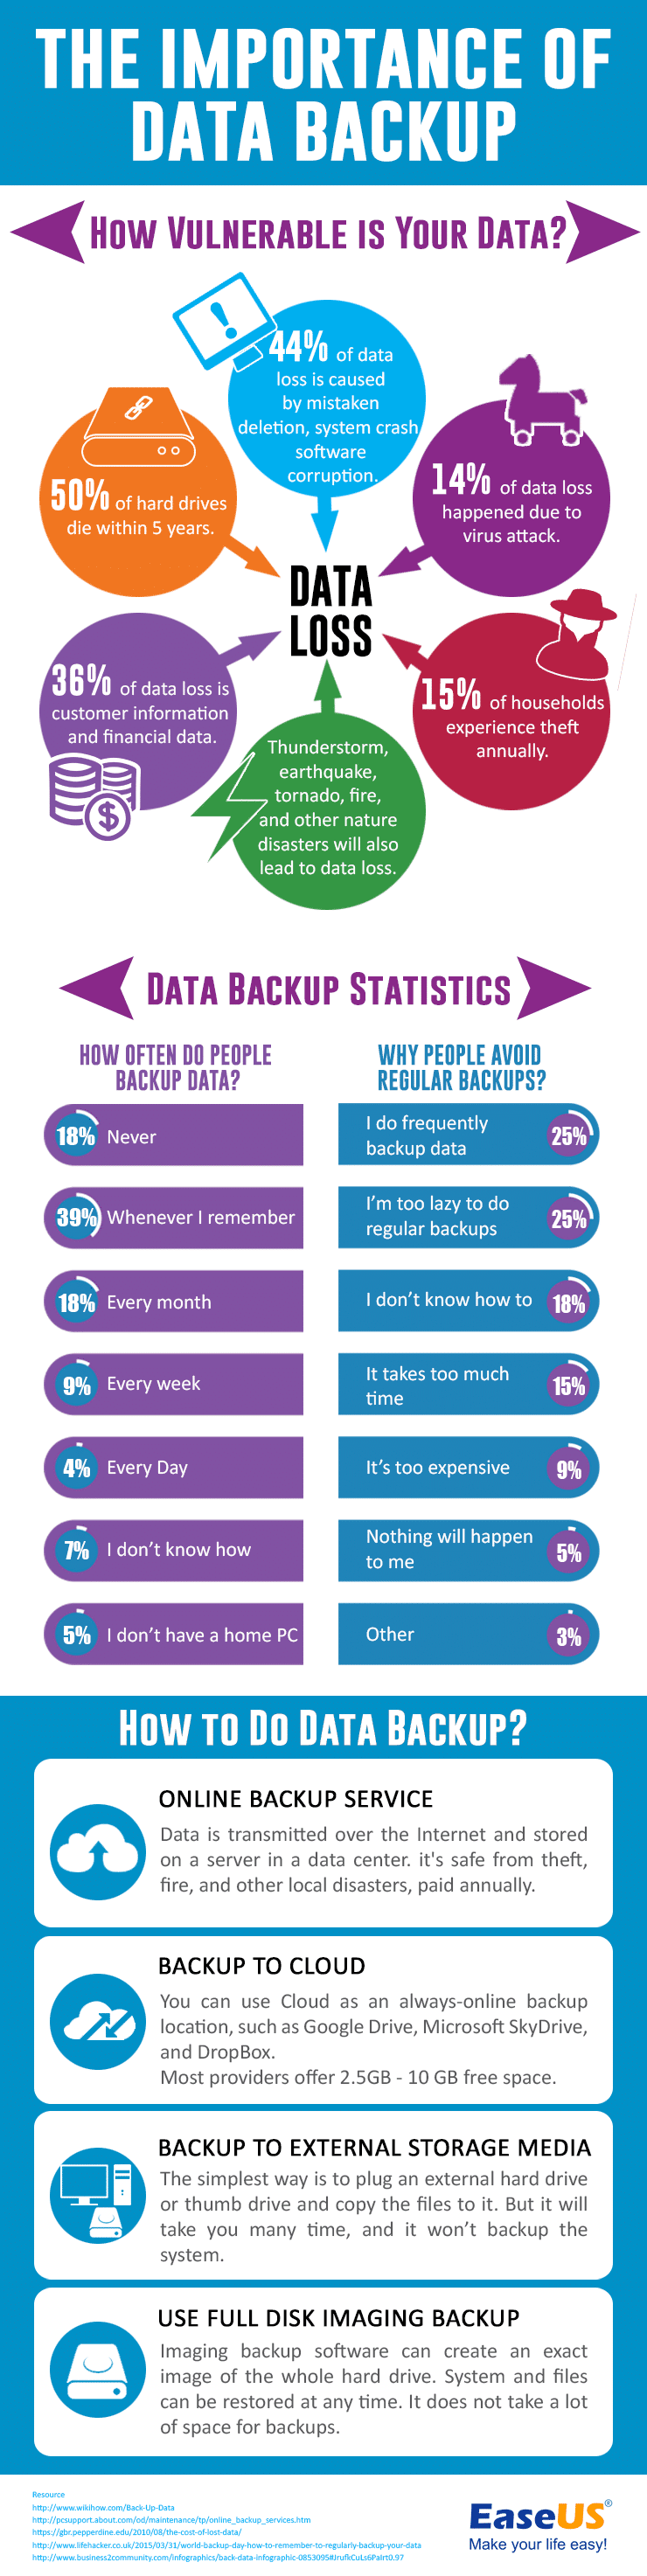 Data Backup Facts And Statistics Infographic